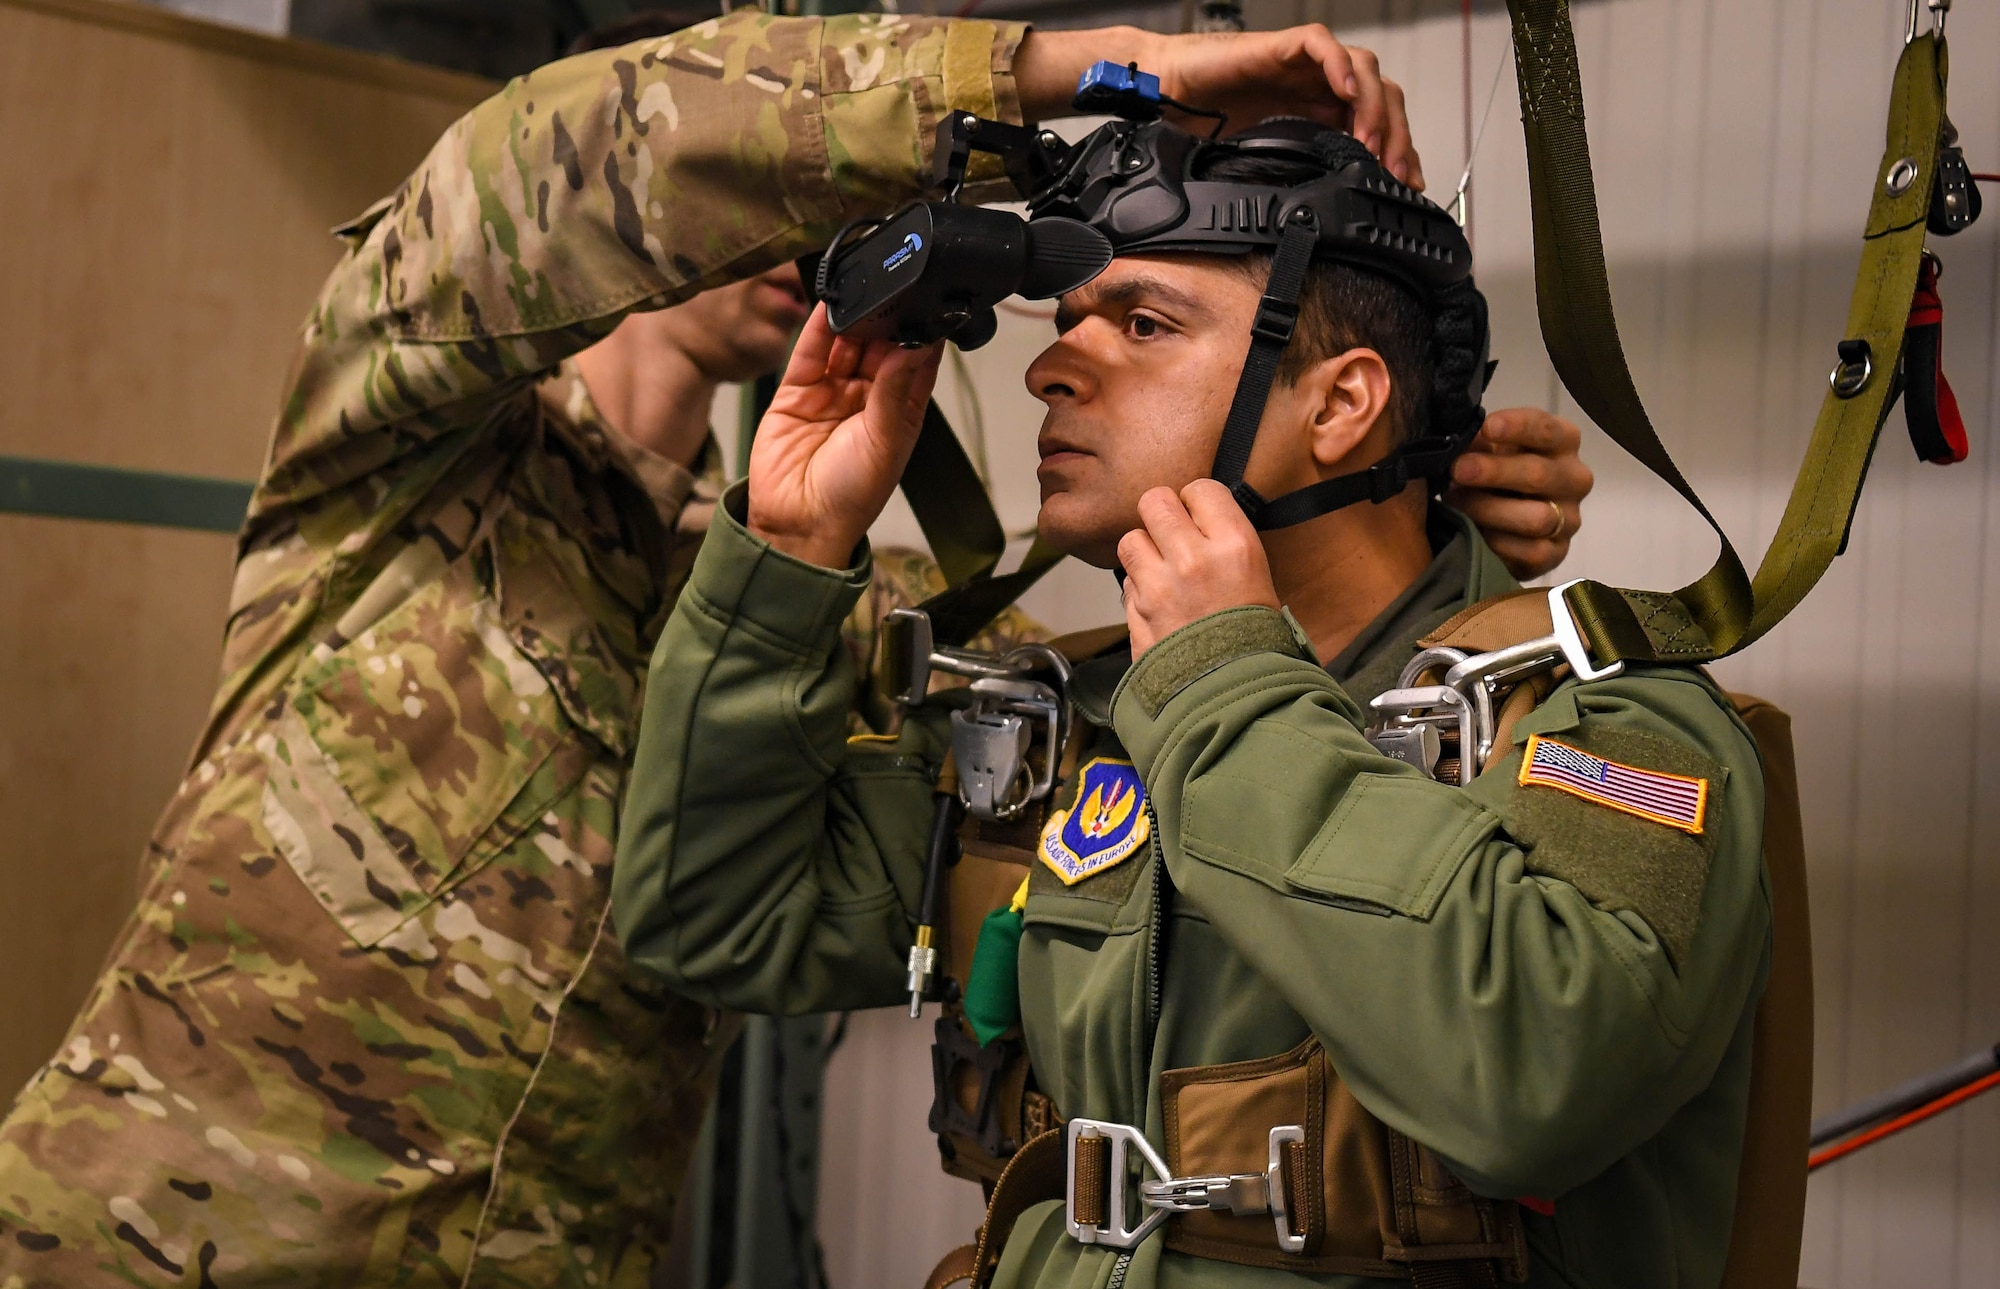 U.S. Air Force Staff Sgt. John Lynch, 86th Operations Support Squadron survival, evasion, resistance and escape specialist, removes the parasim virtual reality parachute training simulator equipment from Capt. Vikas Kumar, 86 OSS aircrew flight equipment chief wing aerospace physiologist, at Ramstein Air Base, Germany, Jan. 27, 2022. The parasim is a virtual reality simulator that allows the trainee to experience an emergency parachute event in a controlled environment. (U.S. Air Force photo by Airman 1st Class Jared Lovett)